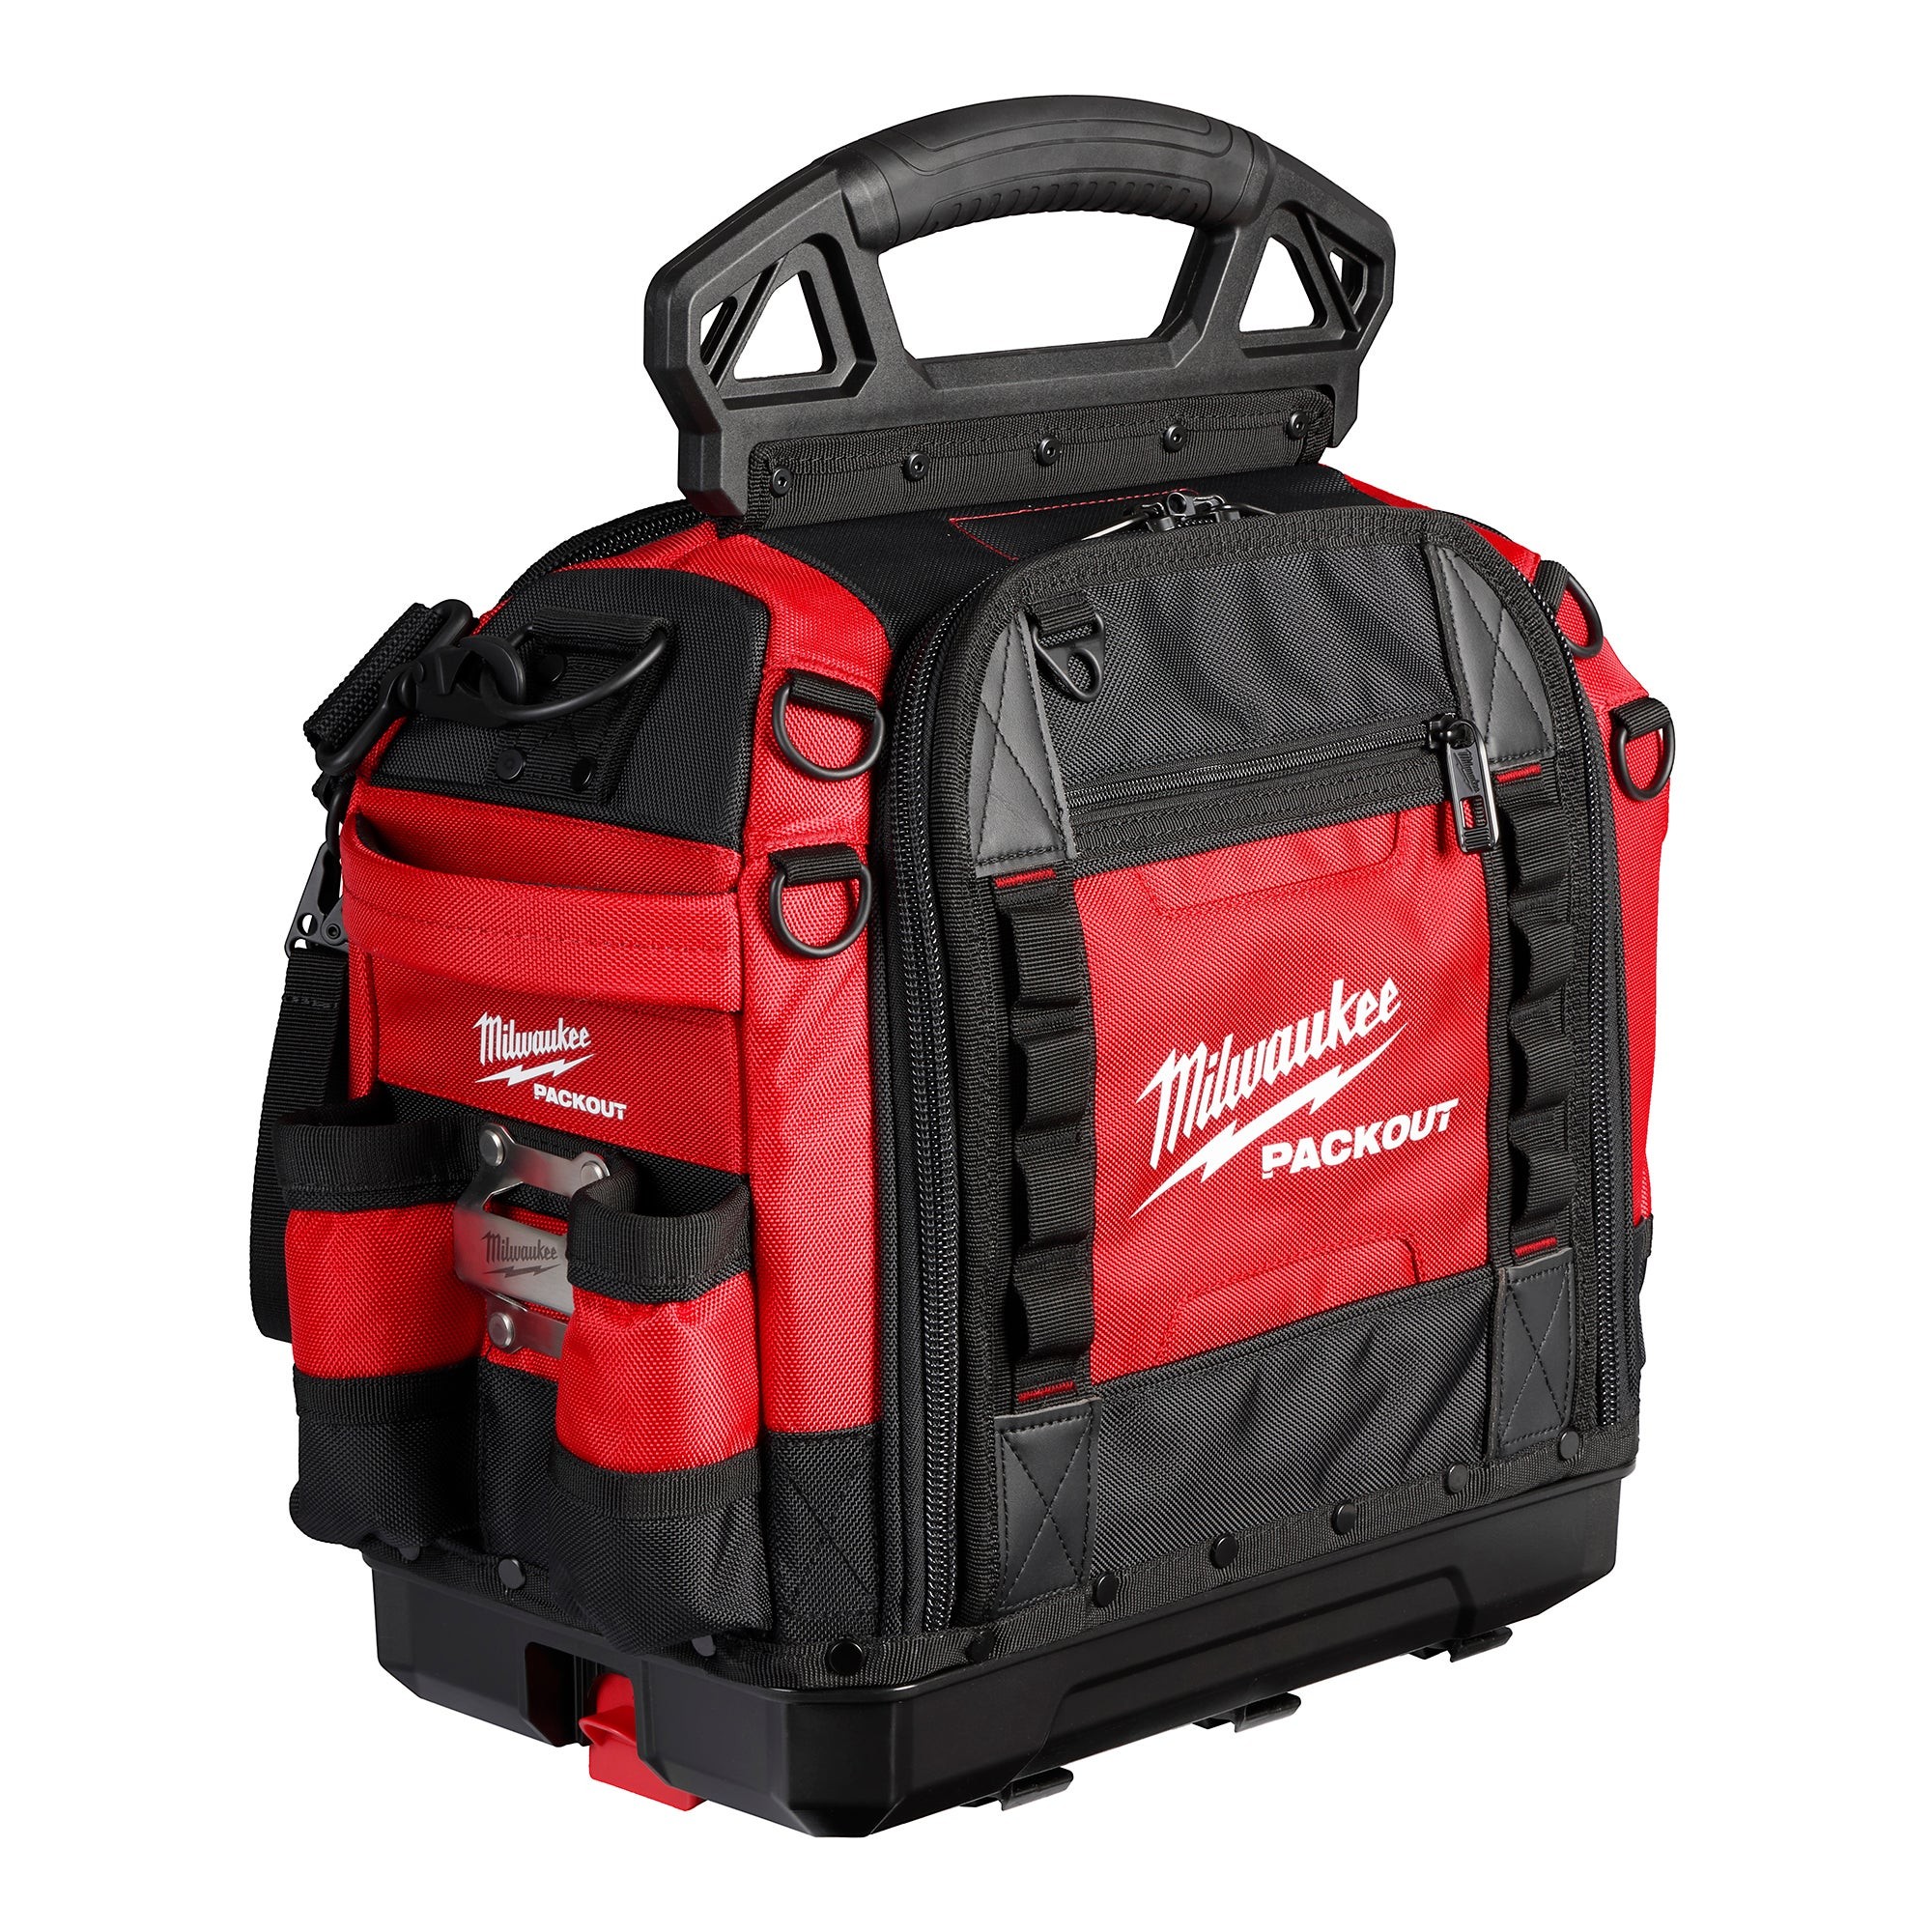 PACKOUT 15" Structured Tool Bag